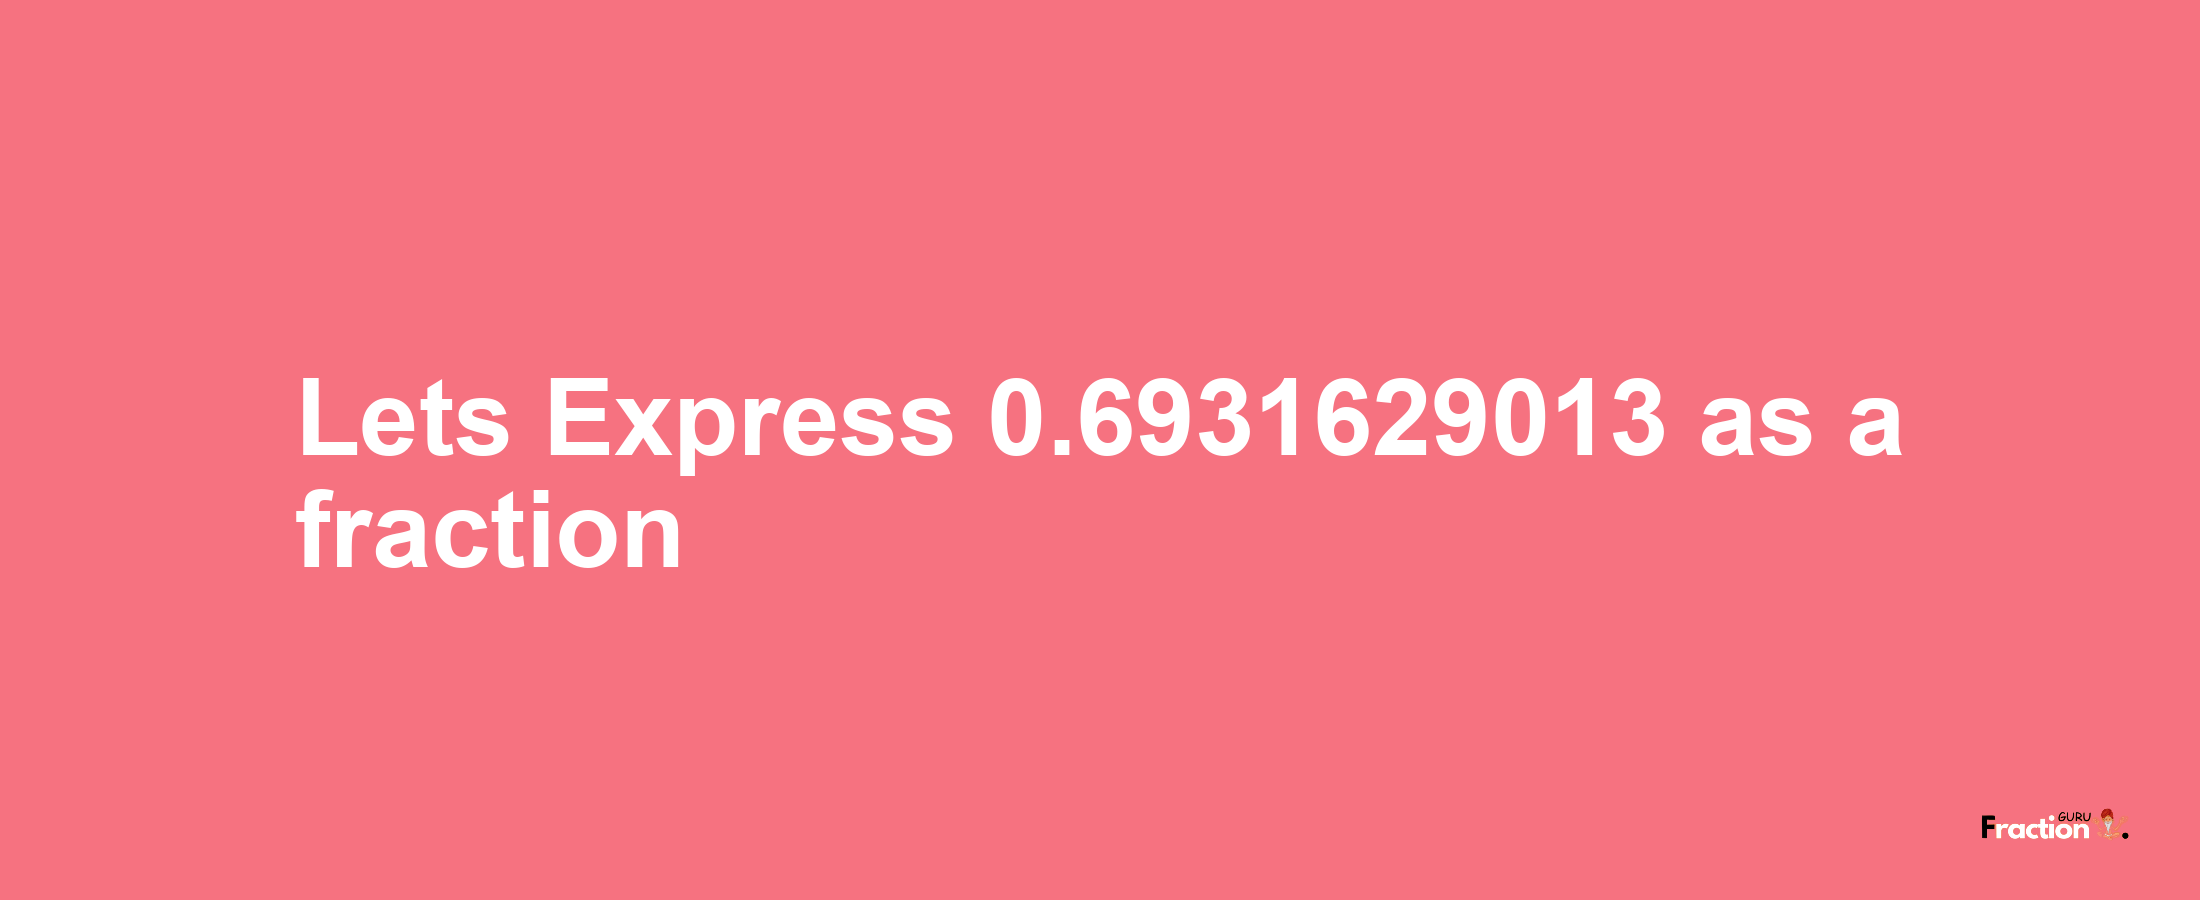 Lets Express 0.6931629013 as afraction